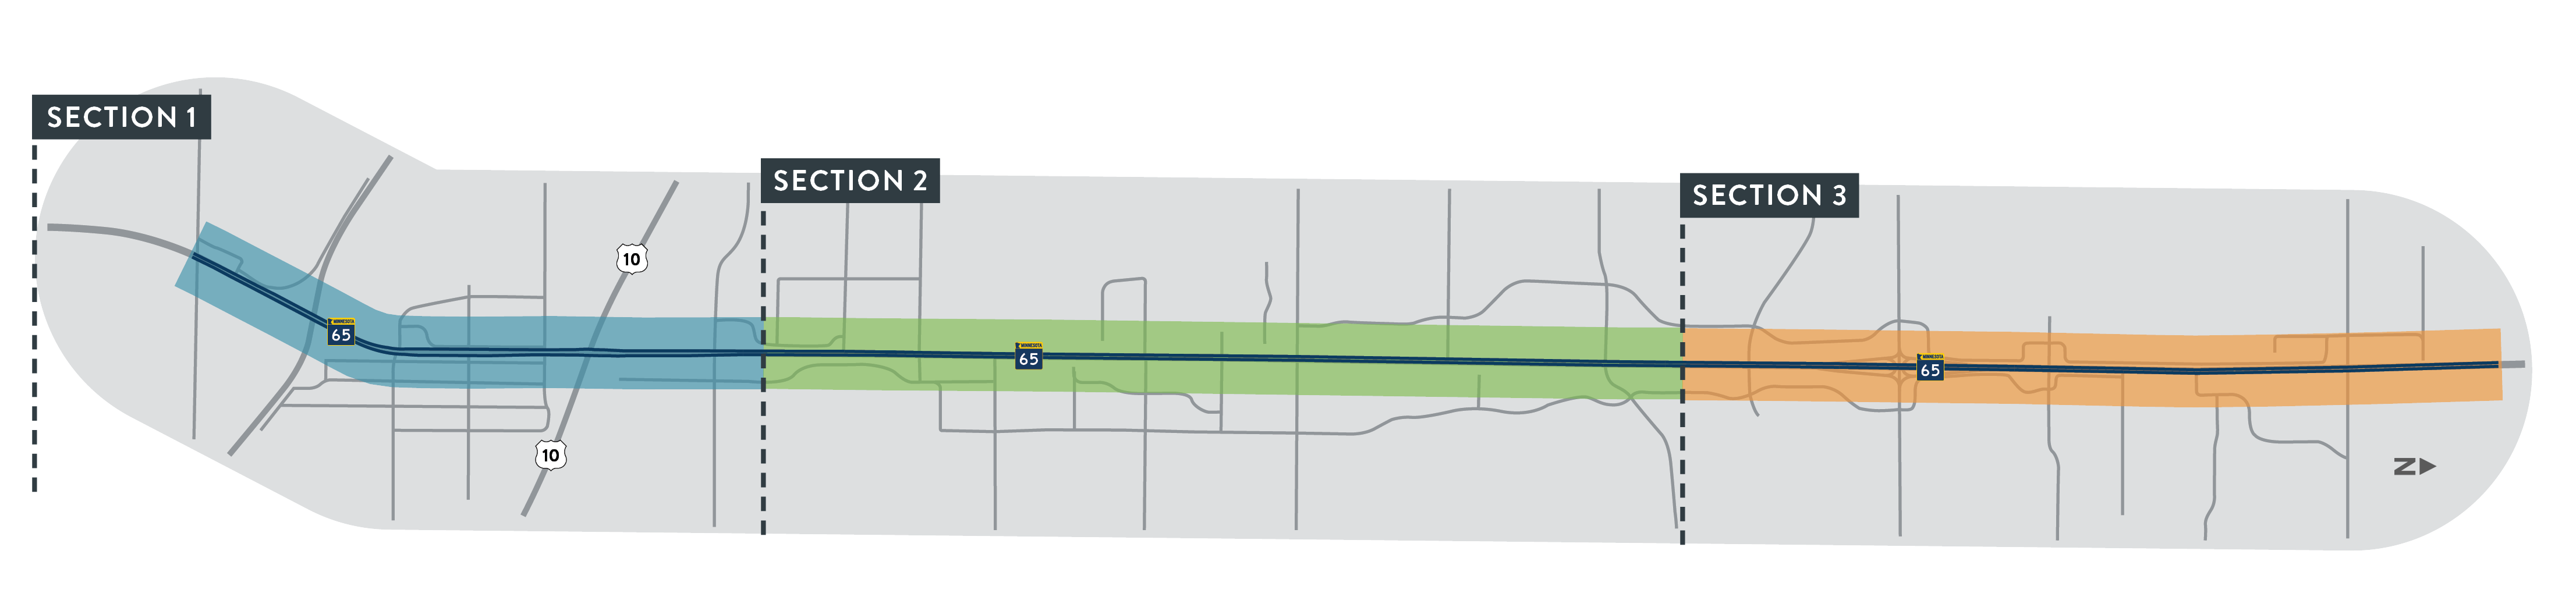 Diagram of the three corridor sections